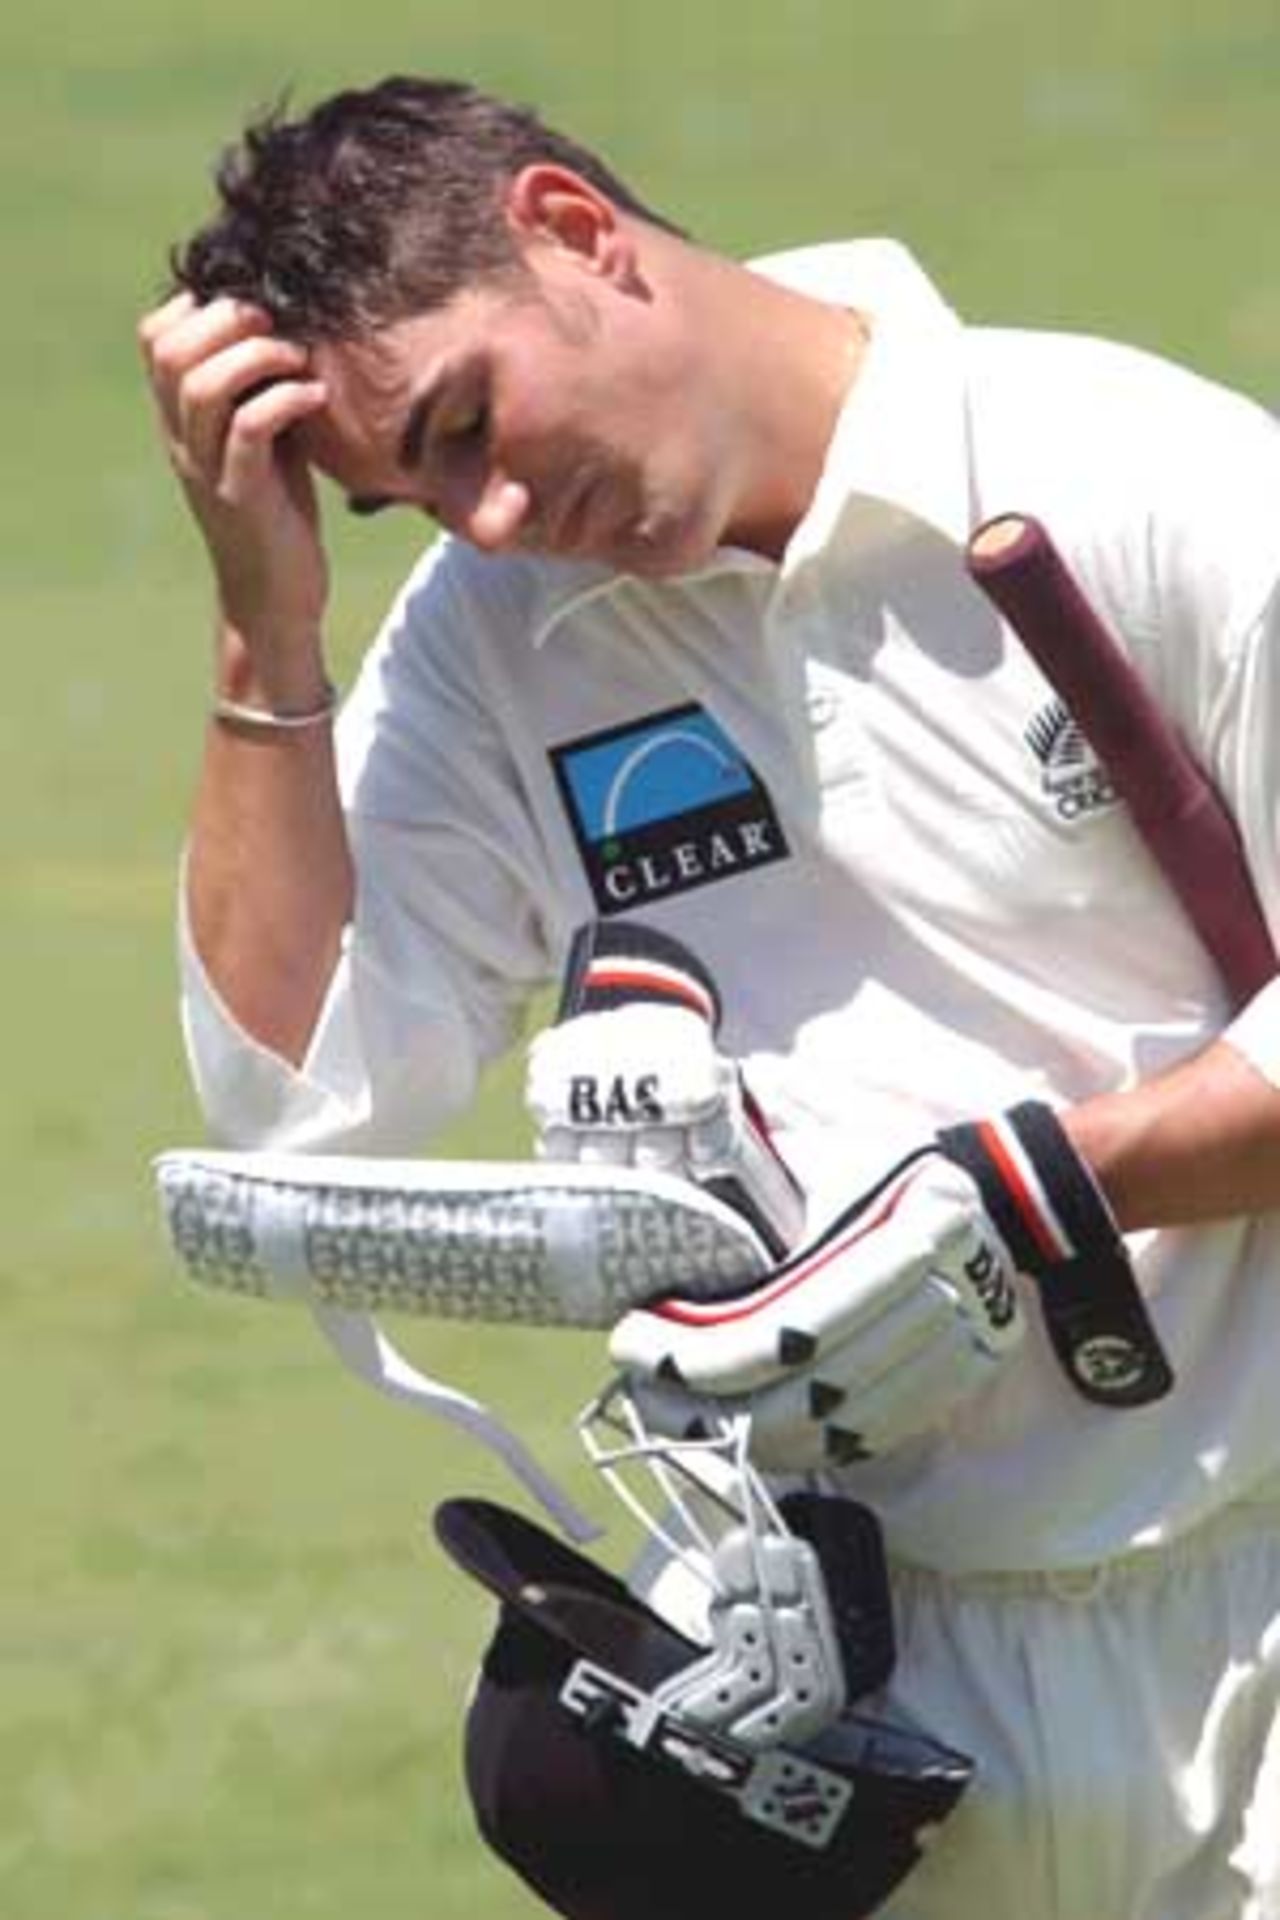 16 Oct 2001: Mathew Sinclair of New Zealand shows his disappointment after being bowled for 17 runs during the New Zealand Cricket team's tour match against the Queensland Academy of Sport XI which is being played at Allan Border Field in Brisbane, Australia.